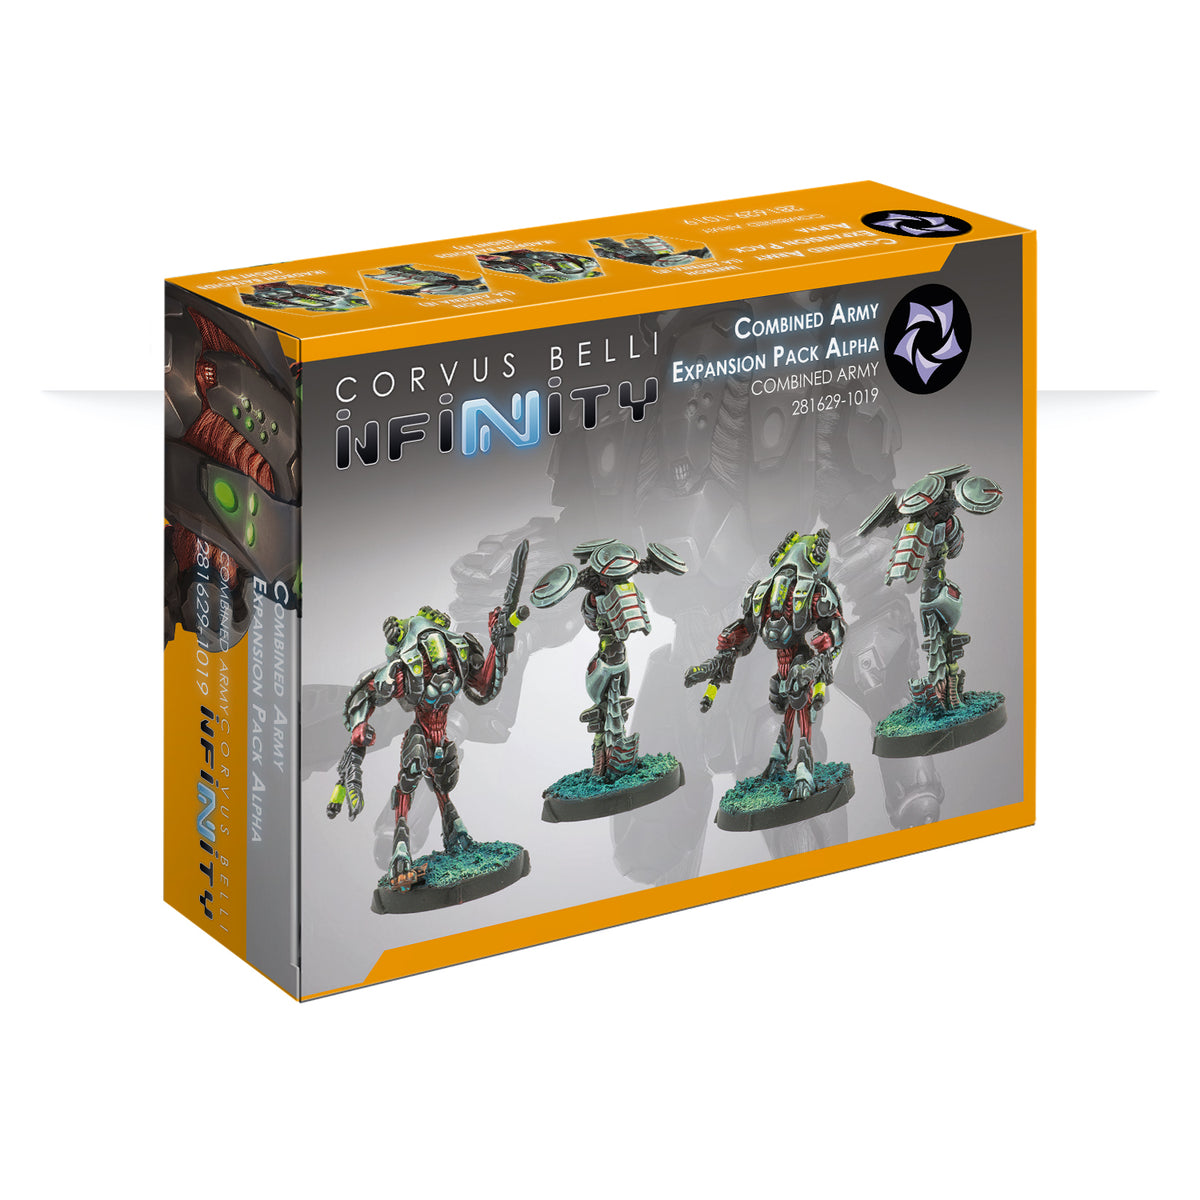 Combined Army Expansion Pack Alpha [SEPTEMBER PRE-ORDER]